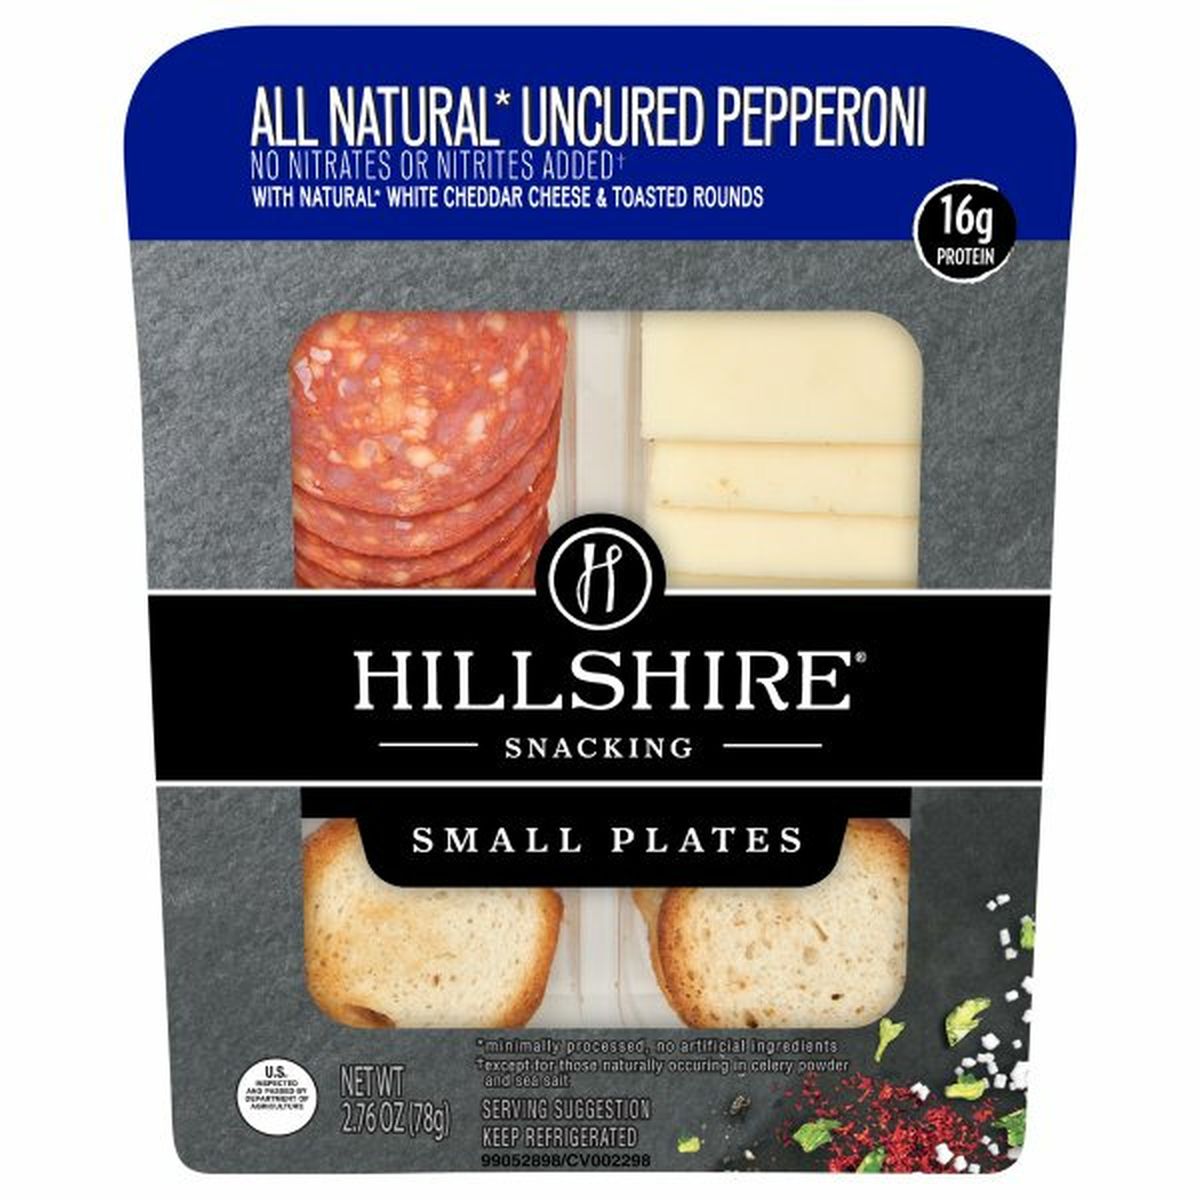 Calories in Hillshire Farm Small Plates, Uncured Pepperoni/White Cheddar Cheese/Toasted Rounds